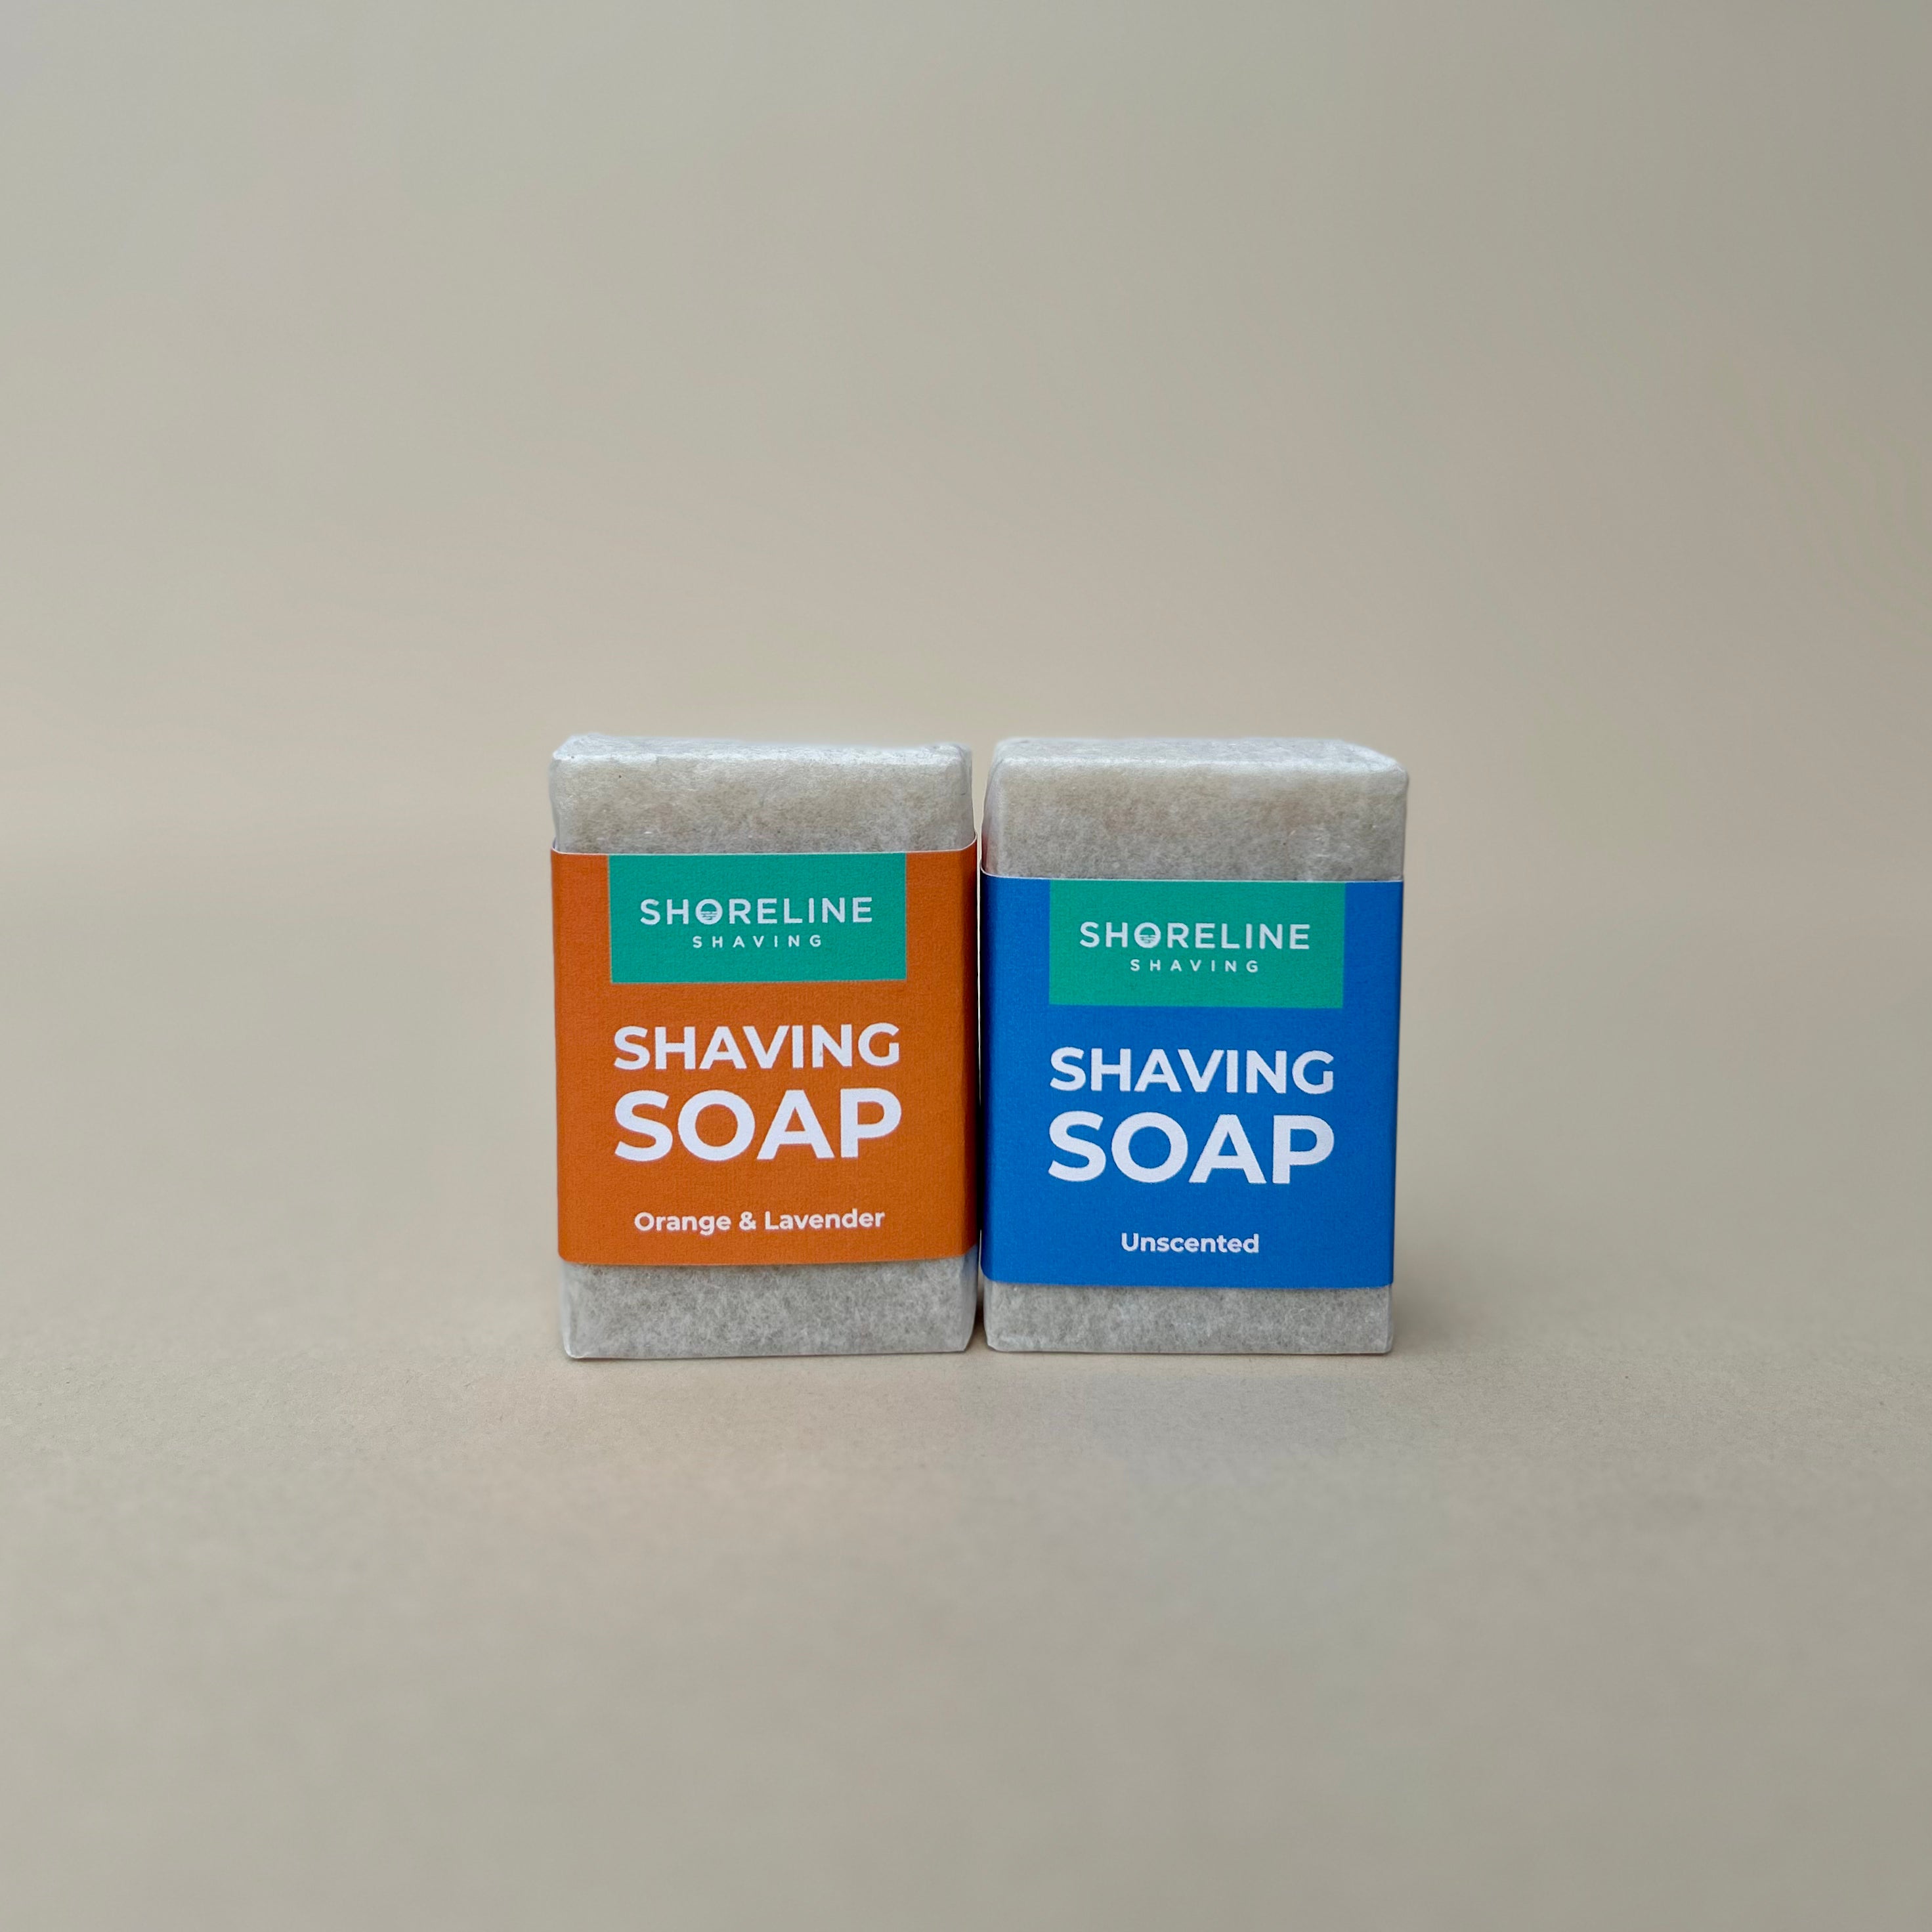 Two natural shaving soaps next to each other on a nude background  - Shoreline Shaving